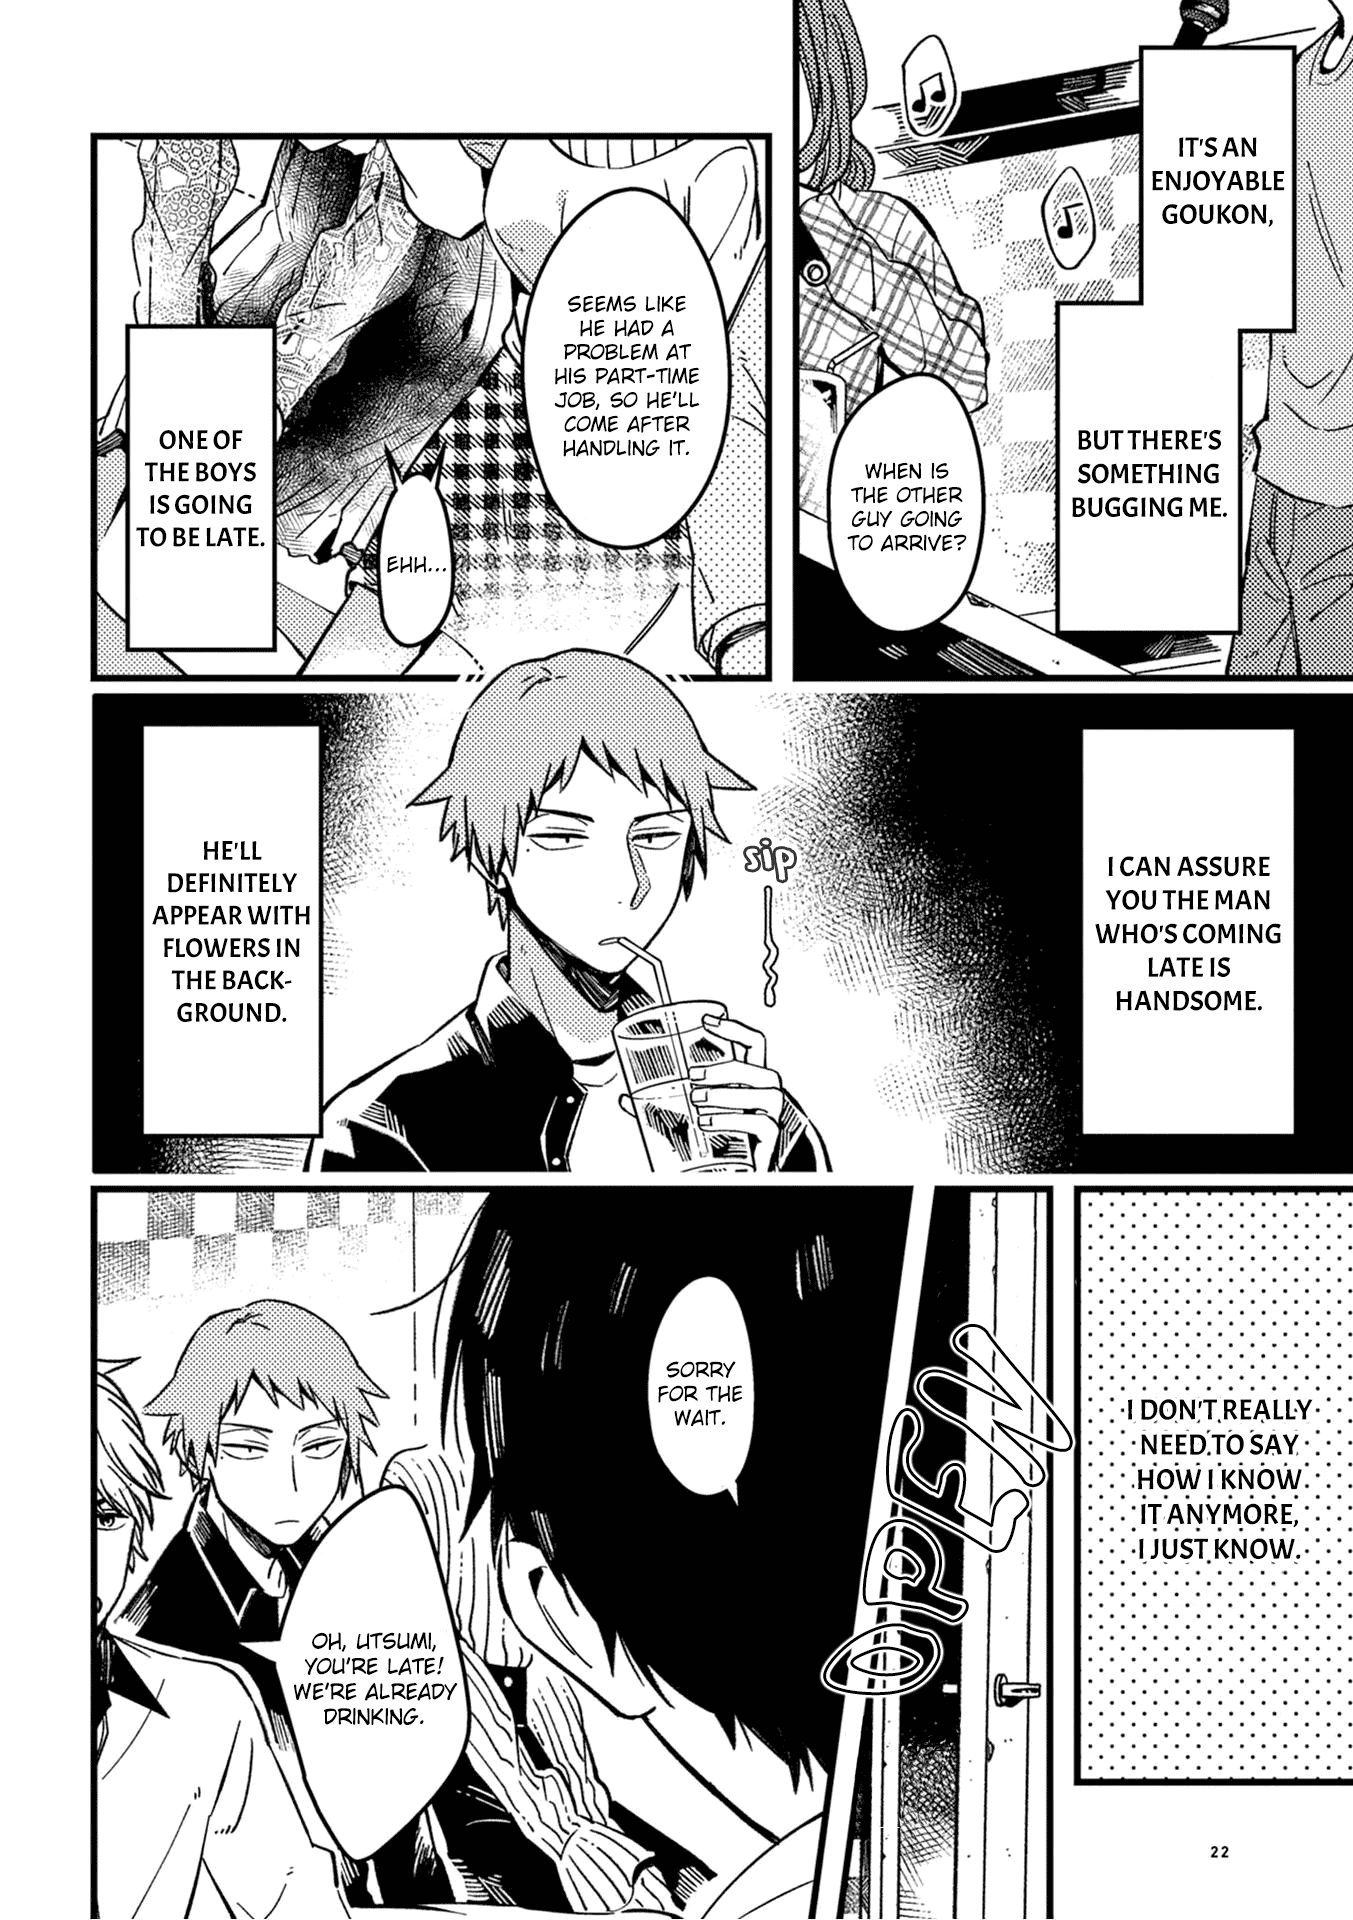 A World Where Everything Definitely Becomes Bl Vs. The Man Who Definitely Doesn't Want To Be In A Bl Vol.2 Chapter 23: Vs Goukon - First Part - Picture 3